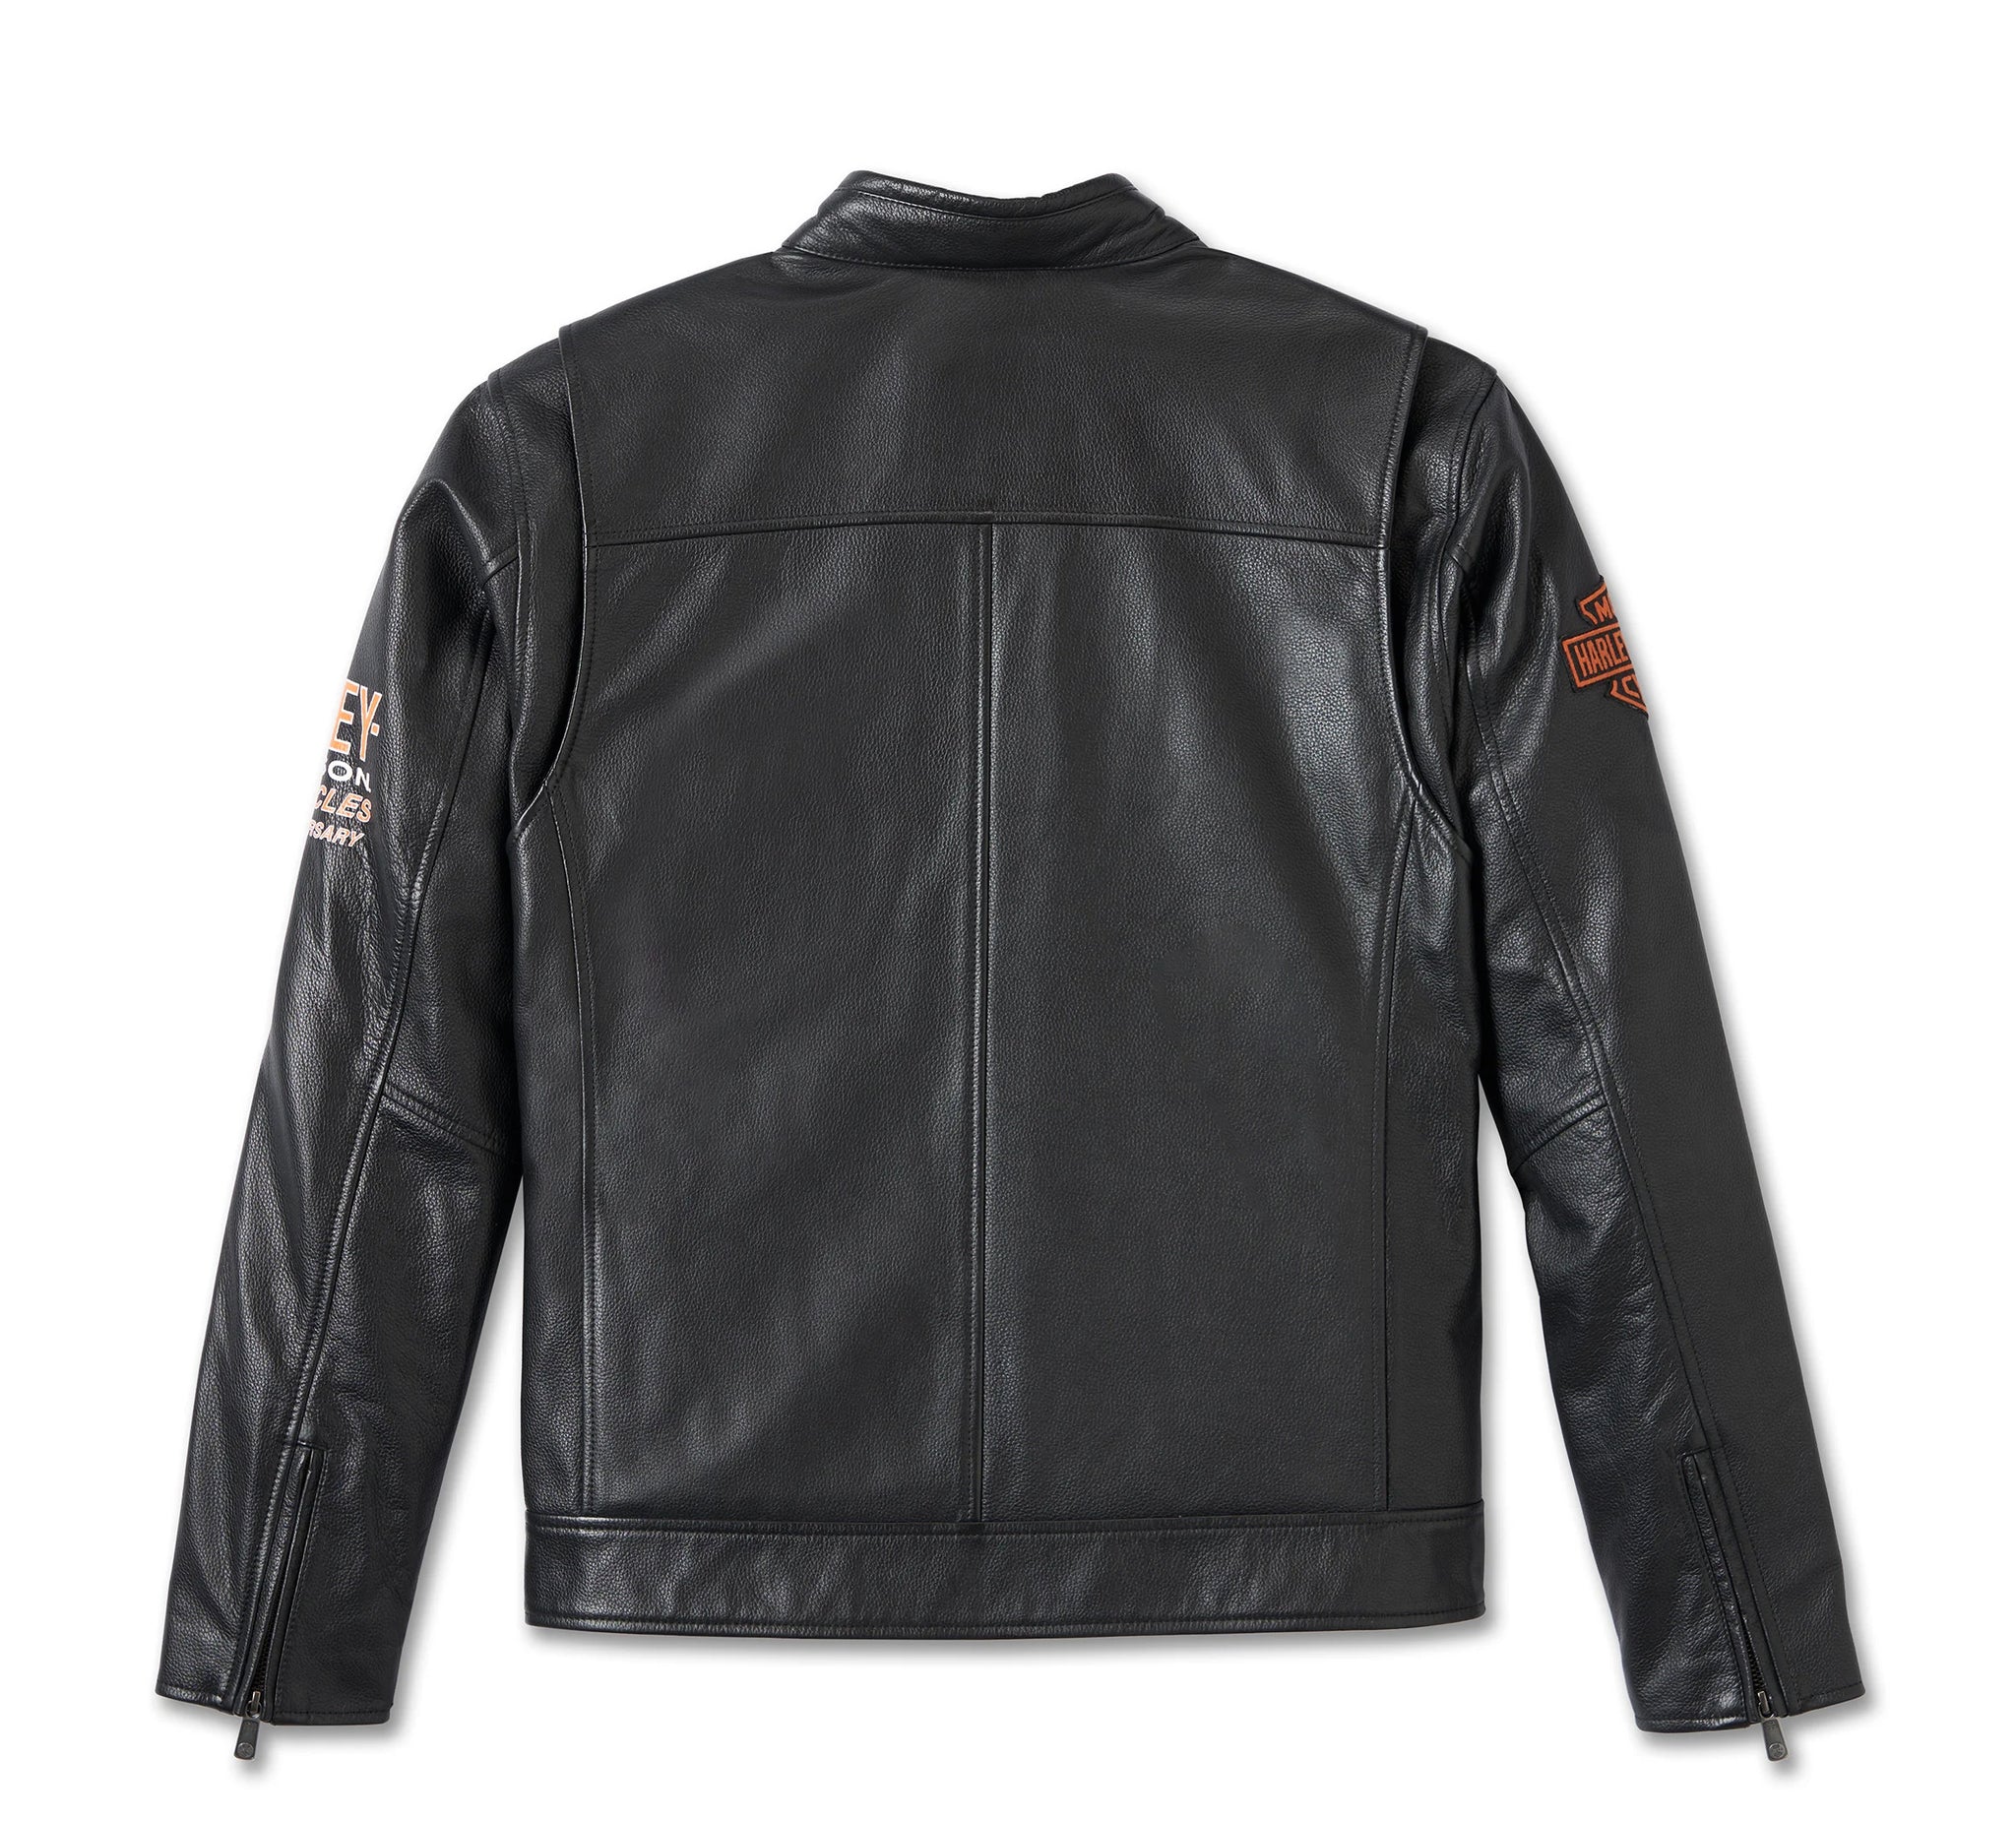 Men's 120th Anniversary Leather Jacket – Linux Leather